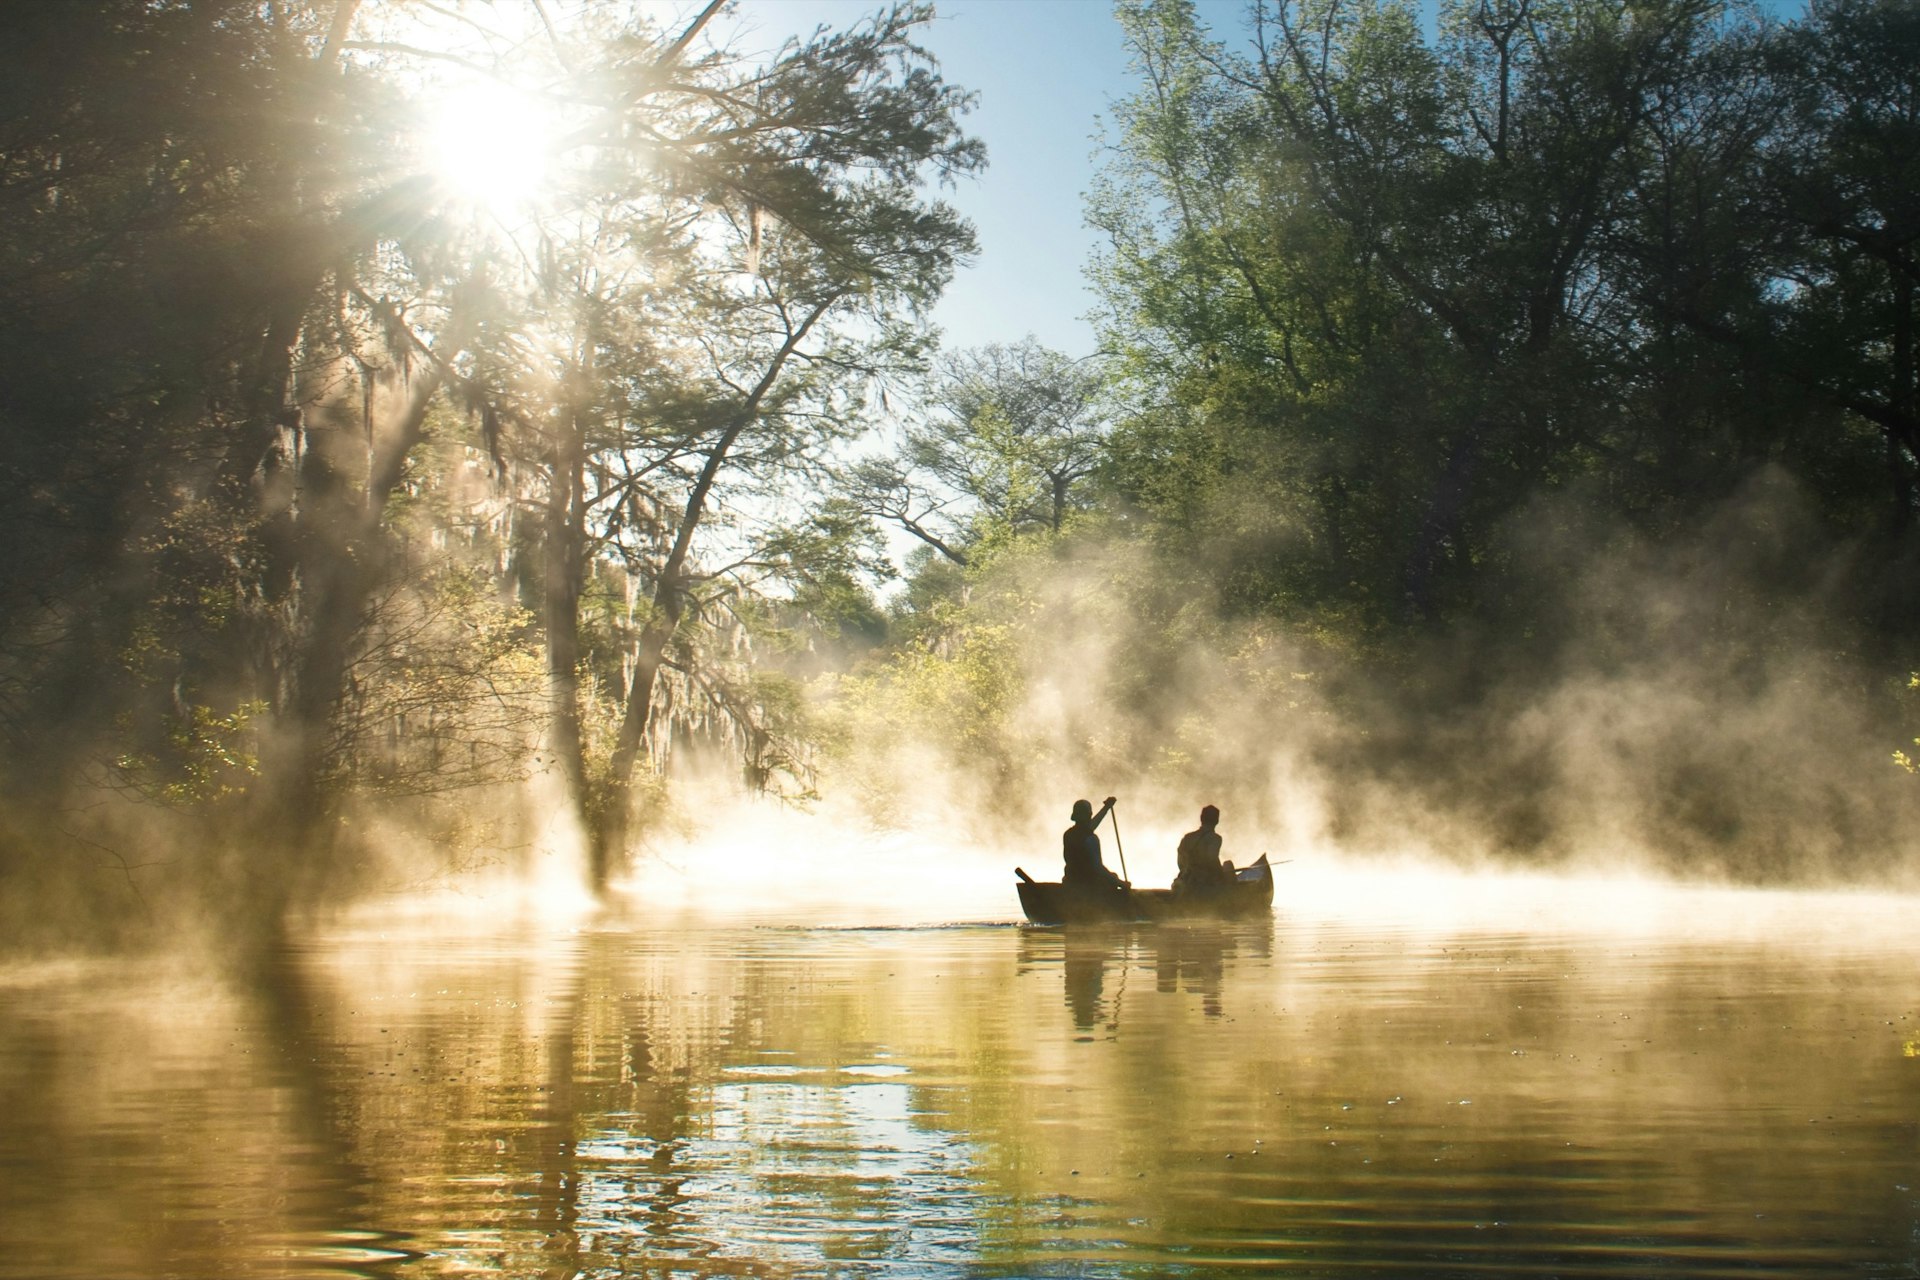 Two people canoe through a misty river in Everglades National Park 